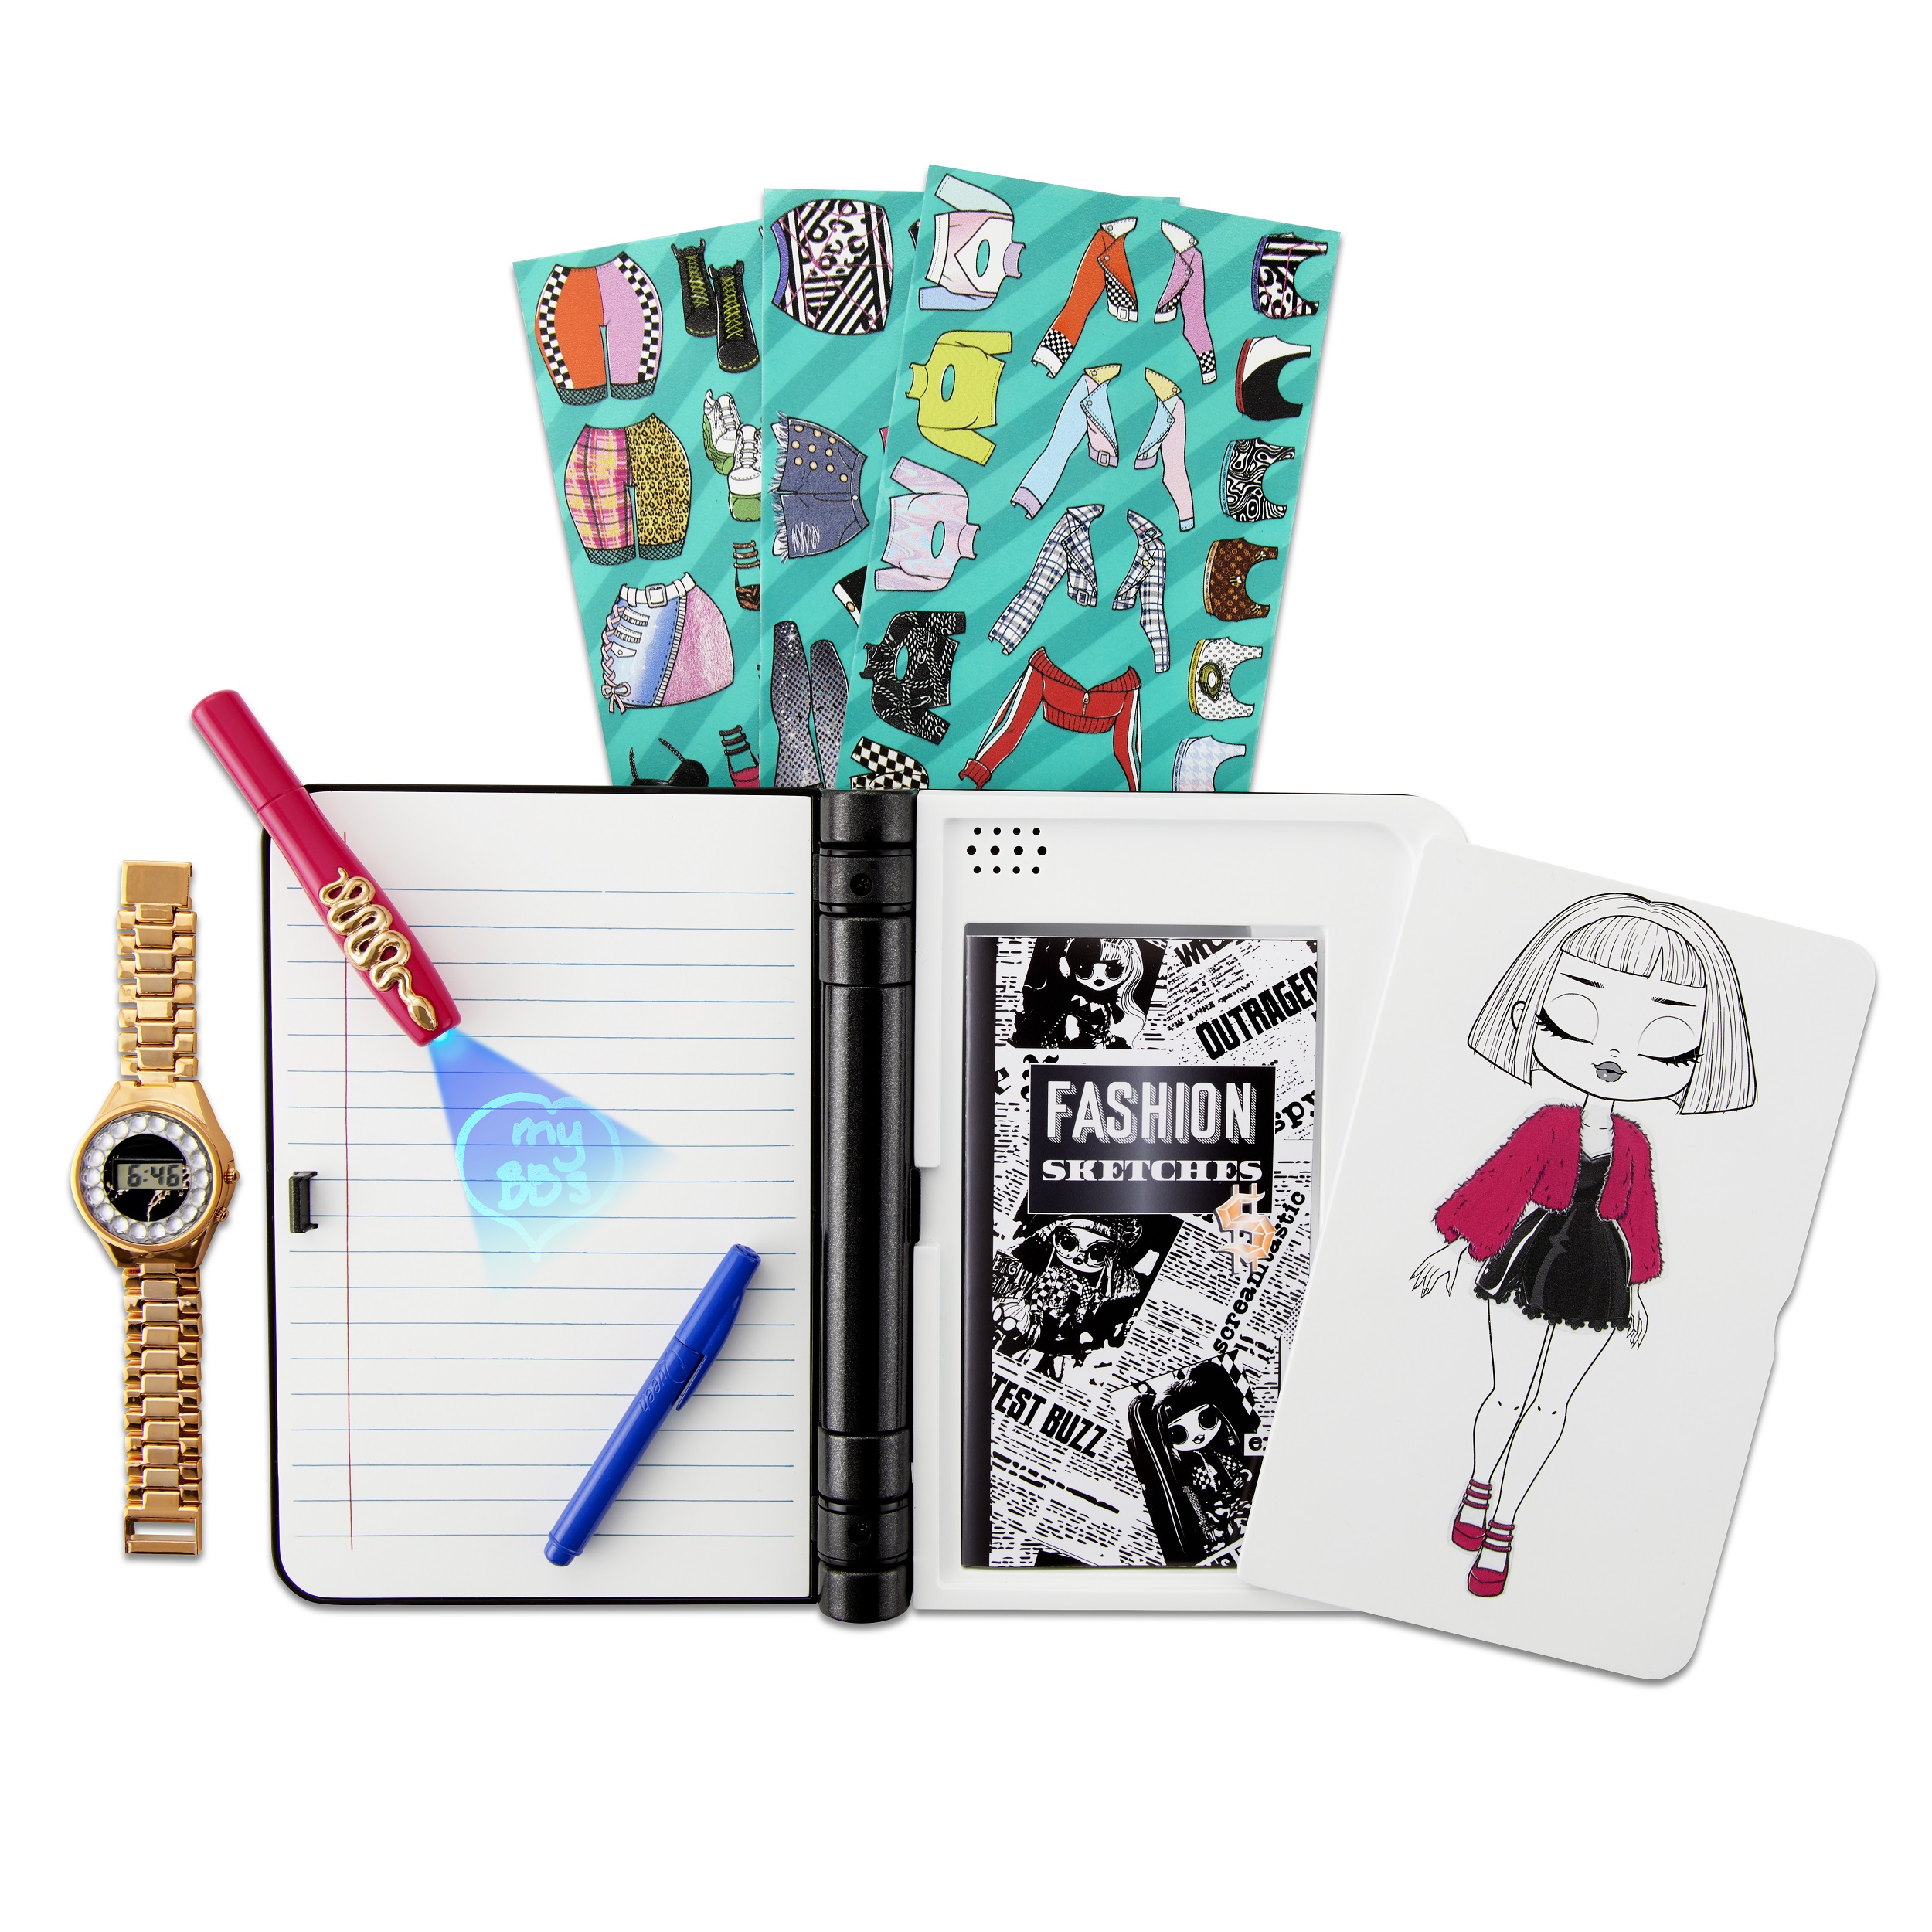 L.O.L. Surprise! O.M.G. Fashion Journal – Electronic Password Journal with Watch - image 1 of 7